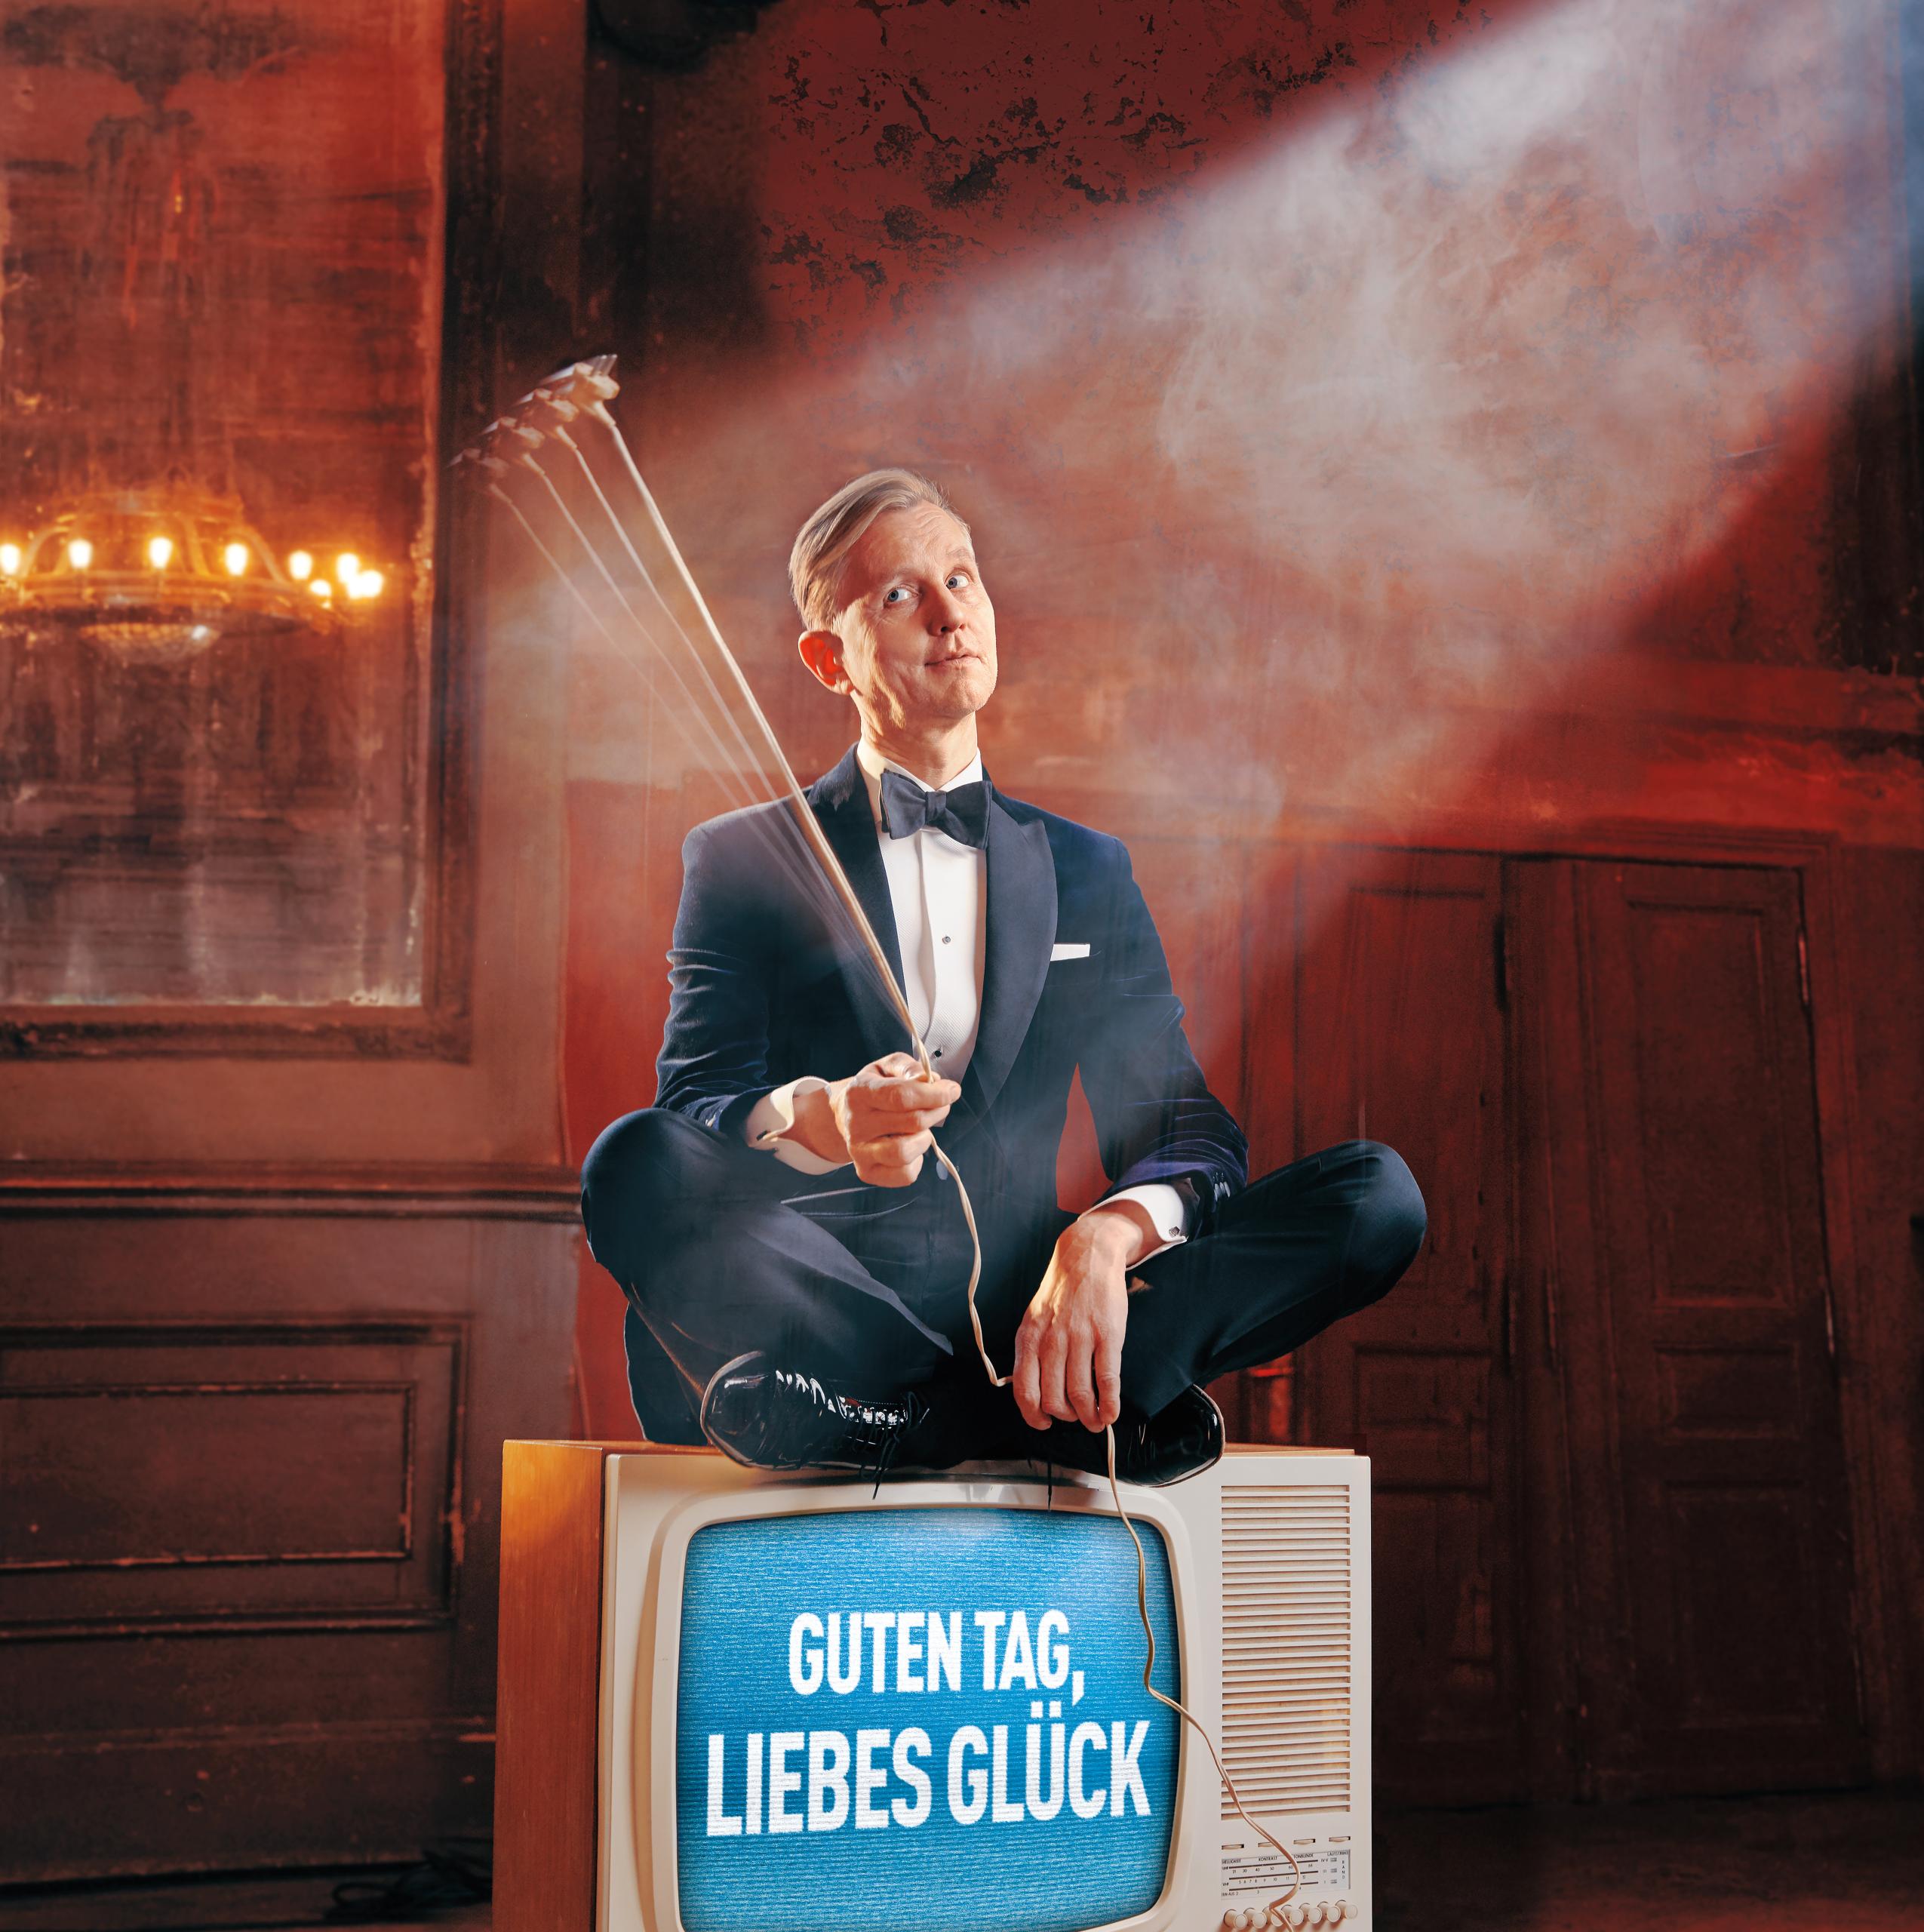 Max Raabe sits on an old TV, on the screen is Guten Tag liebbes Glück (Good day dear luck)
